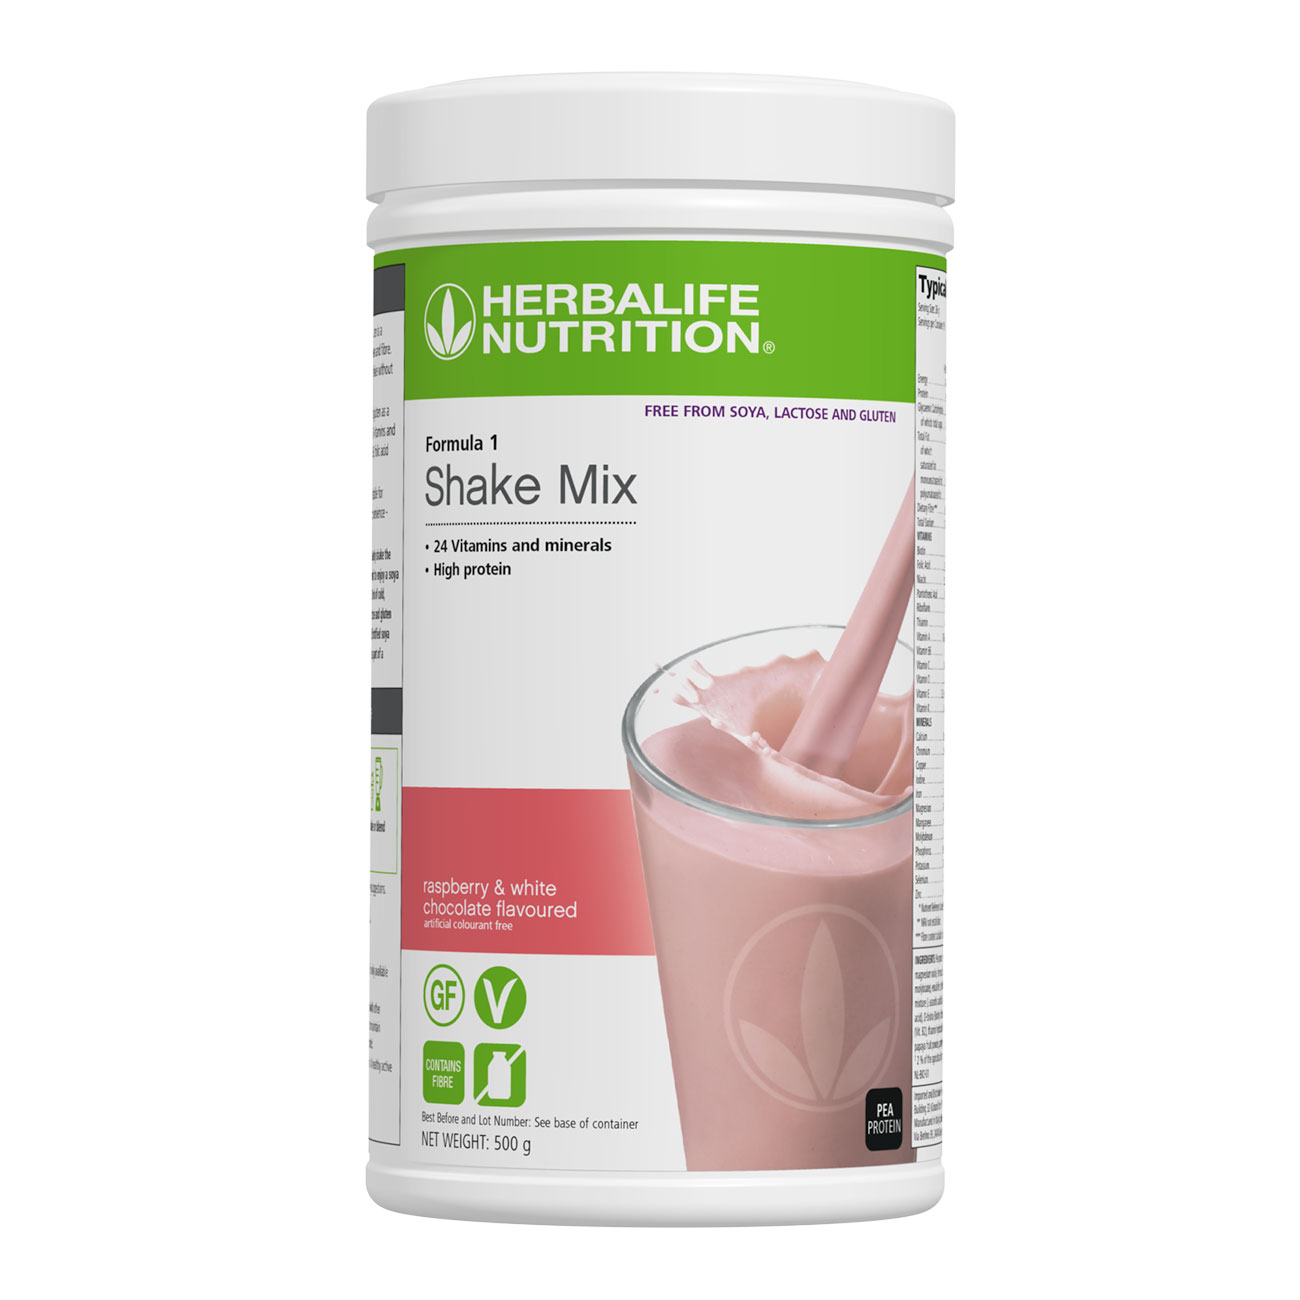 Formula 1 Free-From Shake Mix Raspberry and White Chocolate Flavoured product shot